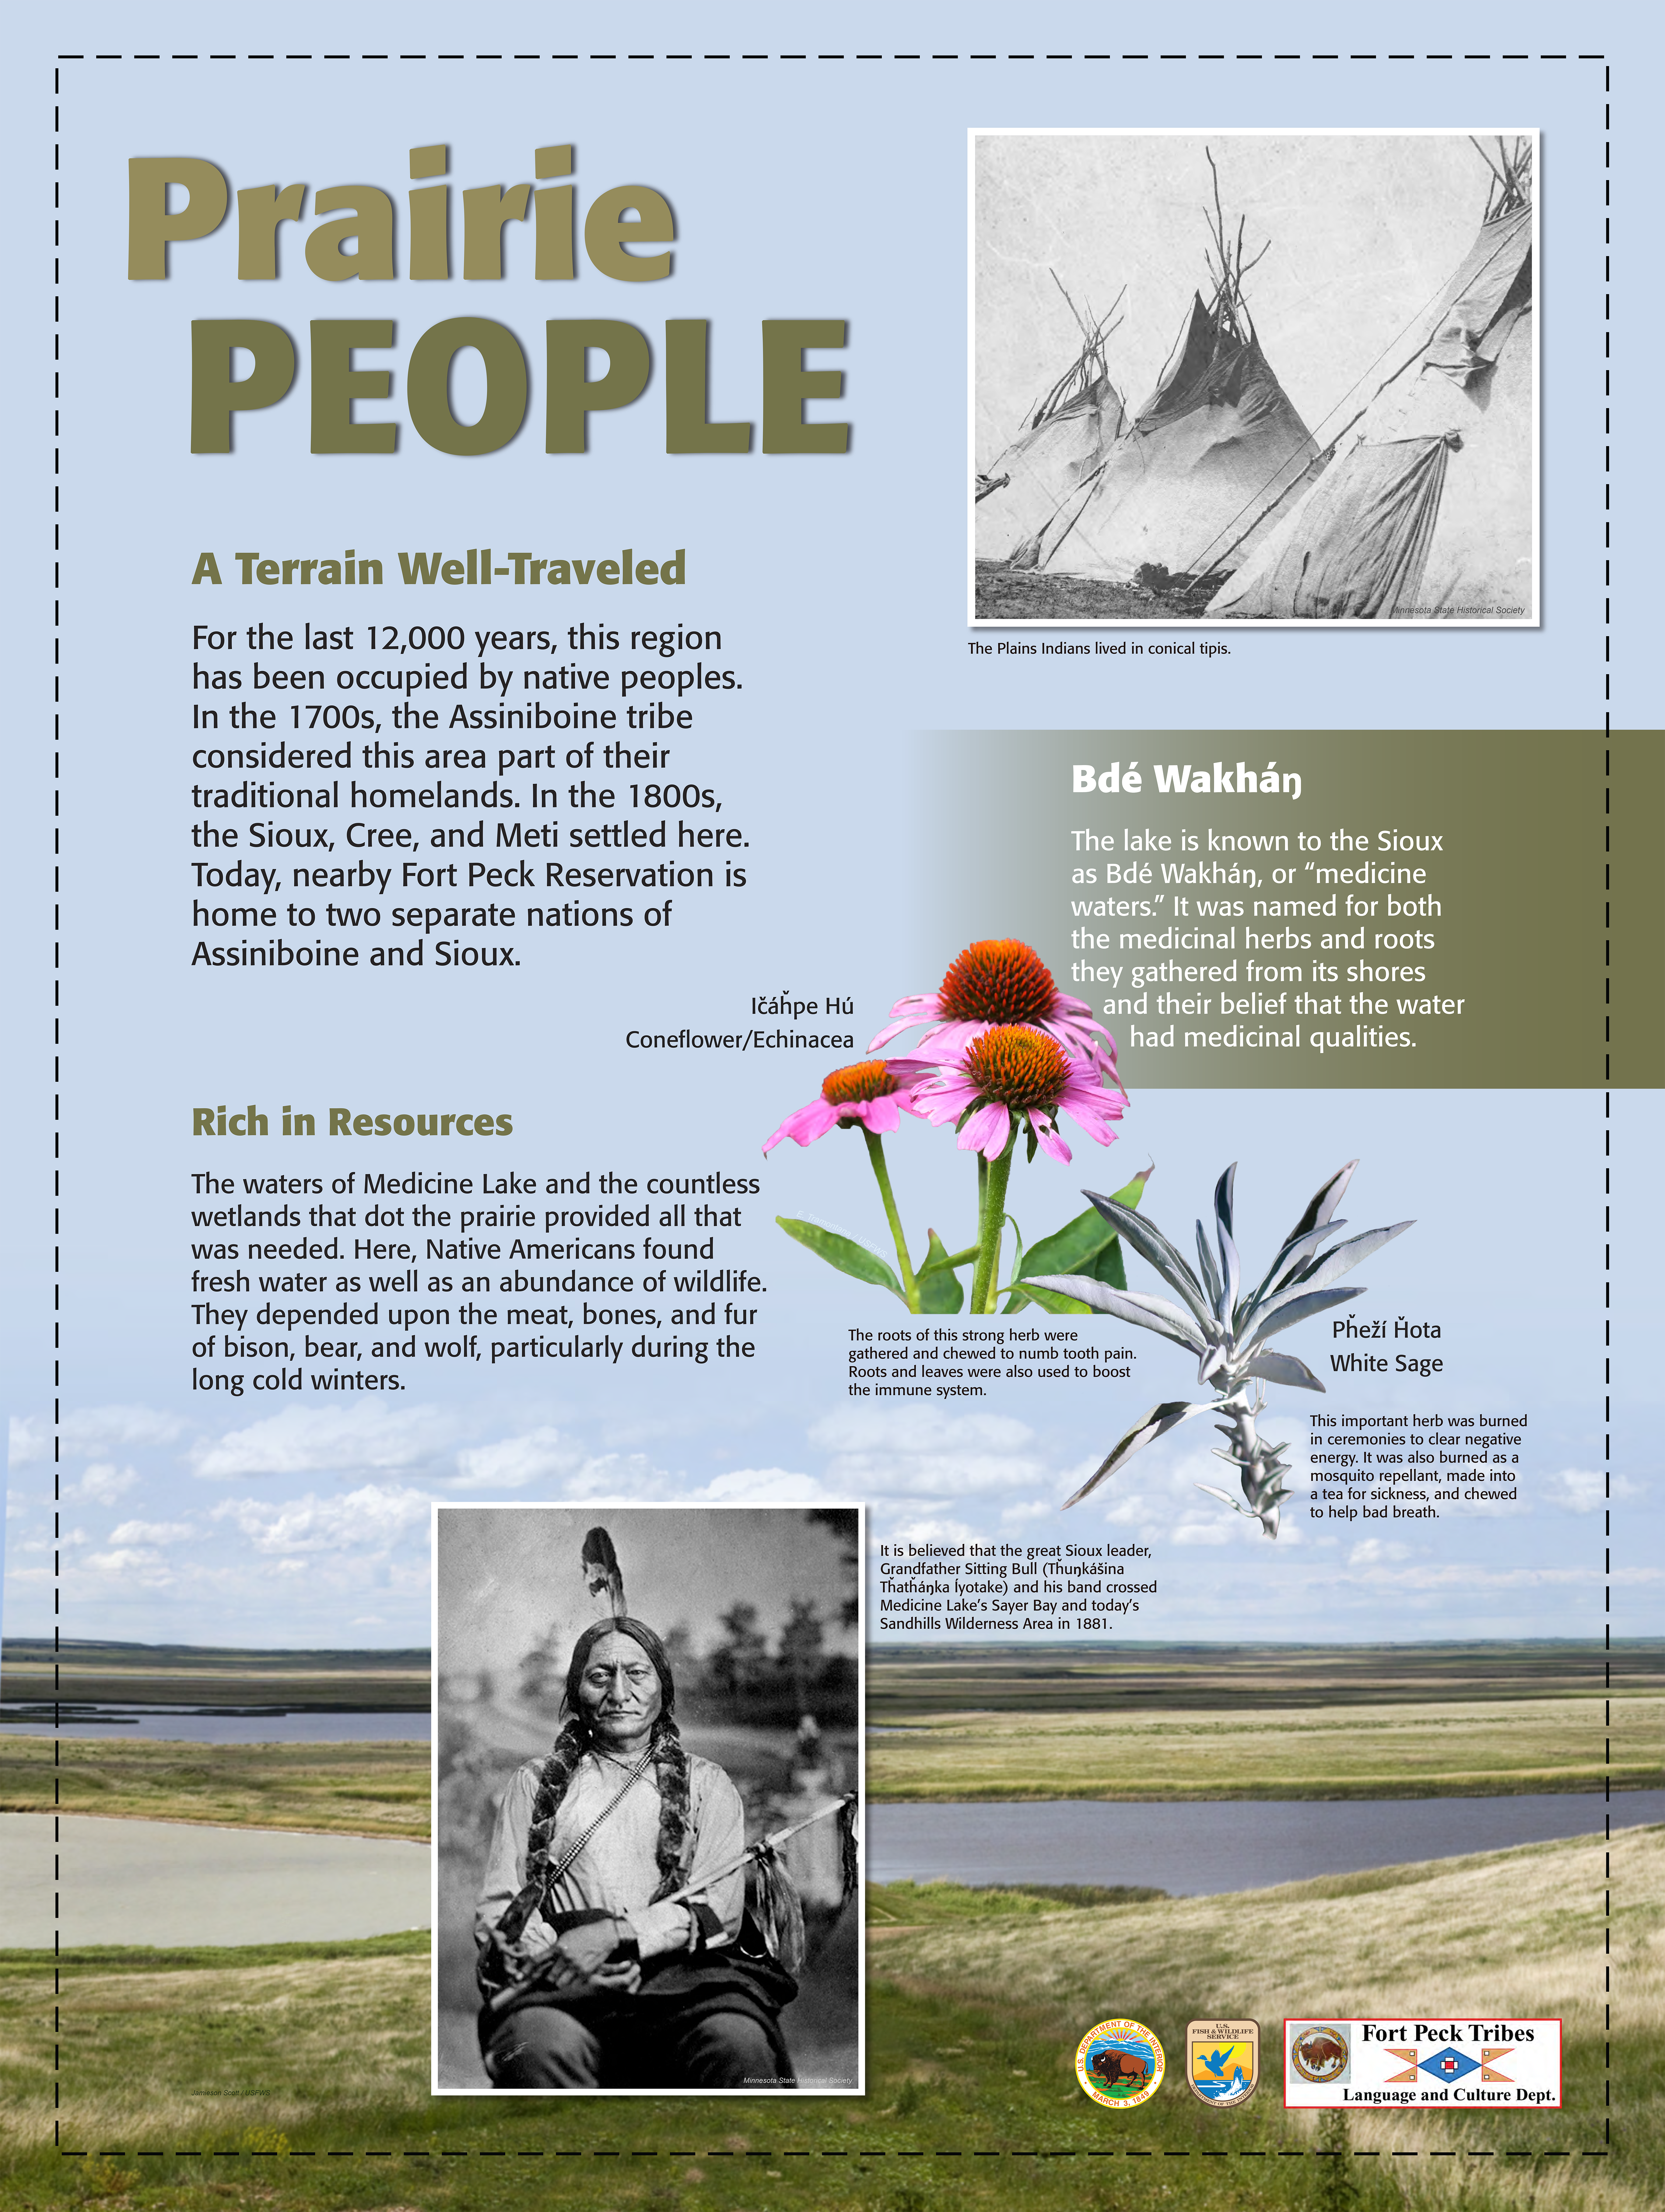 Prairie People: A Terrain Well-Traveled. For the last 12,000 years, this region  has been occupied by native peoples. In the 1700s, the Assiniboine tribe  considered this area part of their traditional homelands. In the 1800s,  the Sioux, Cree, and Meti settled here. Today, nearby Fort Peck Reservation is  home to two separate nations of Assiniboine and Sioux. The waters of Medicine Lake and the countless wetlands that dot the prairie provided all that was needed.